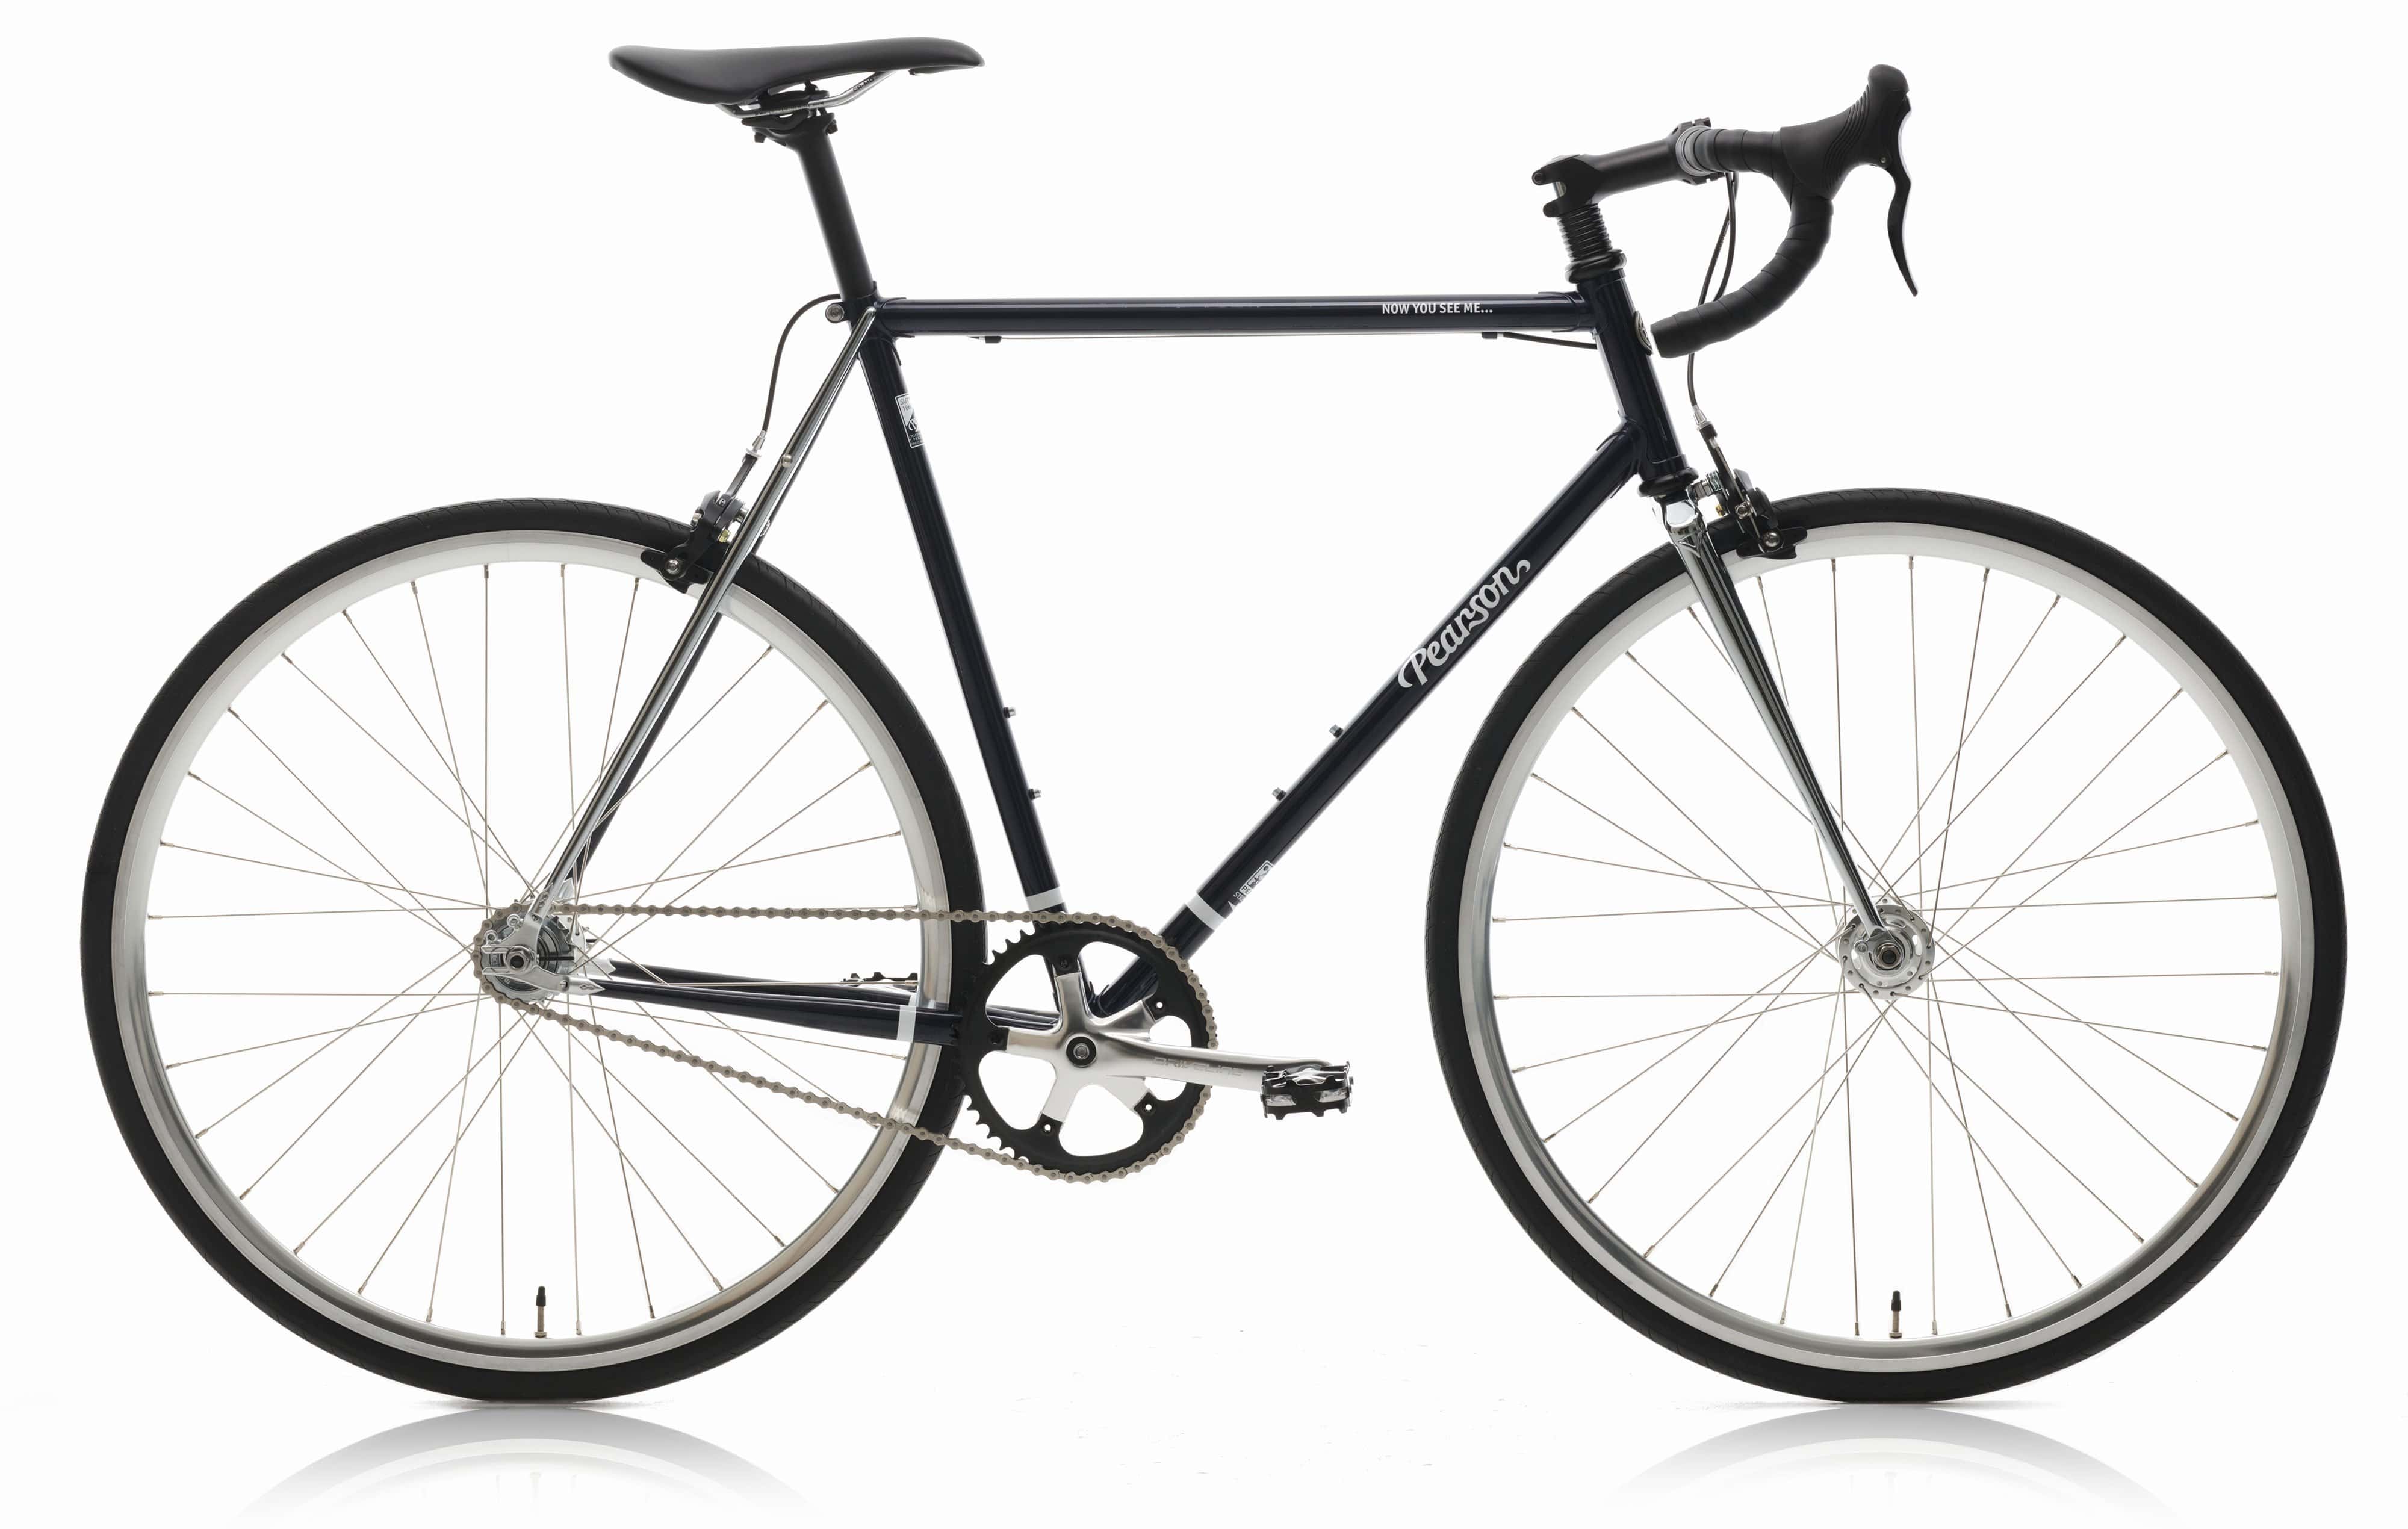 Pcs  Now You See Me - Steel Single Speed Bike  Continental Gator Hardshell 28mm / Without Mudguards / Xx-large